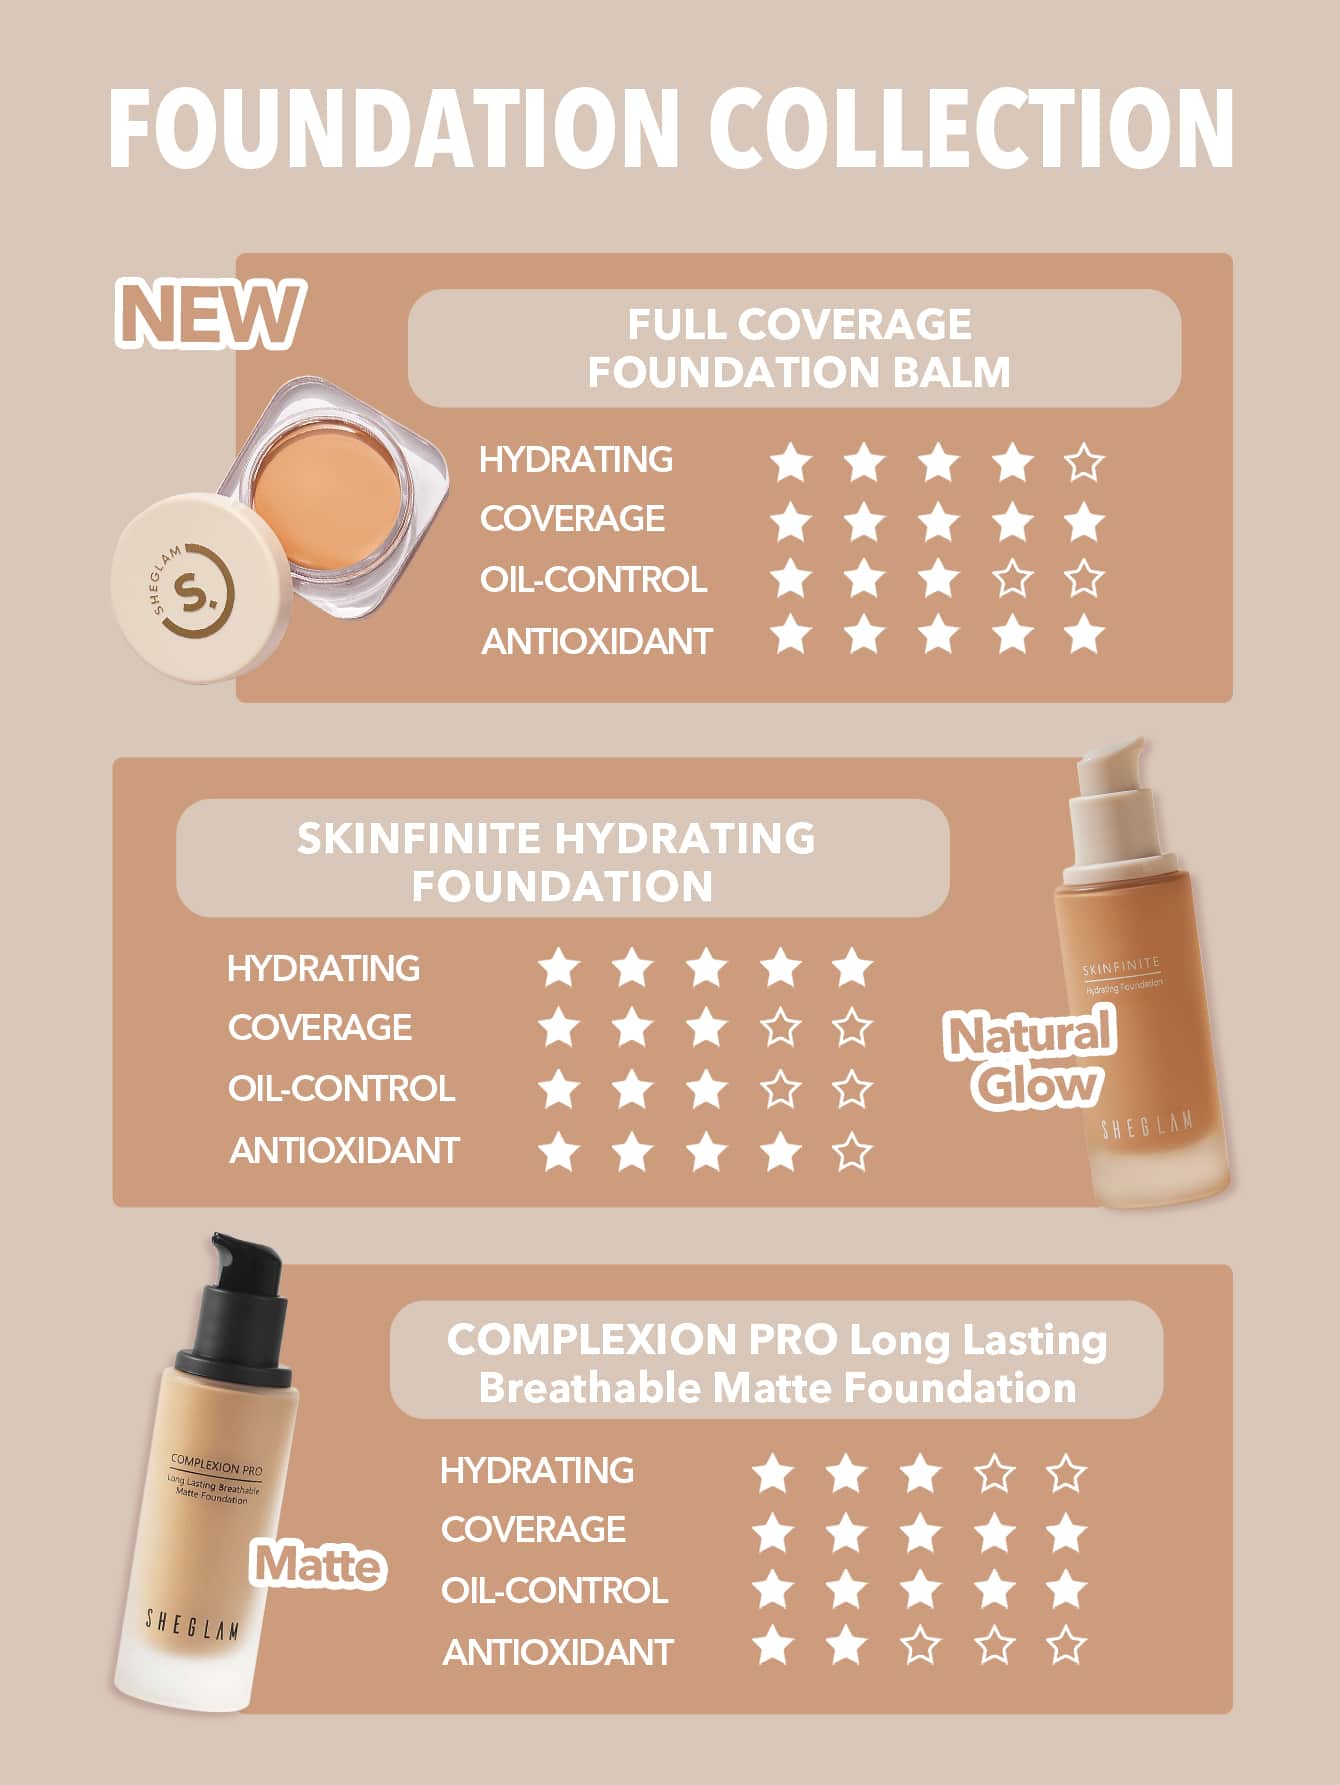 SHEGLAM Full Coverage Foundation Balm-Peach Long Lasting Flawless Moisturizing Foundation Oil-Control Color Corrector Concealer Poreless Cover Blemish Non-Greasy Non-Caking Smoother-Looking Cream Foundation